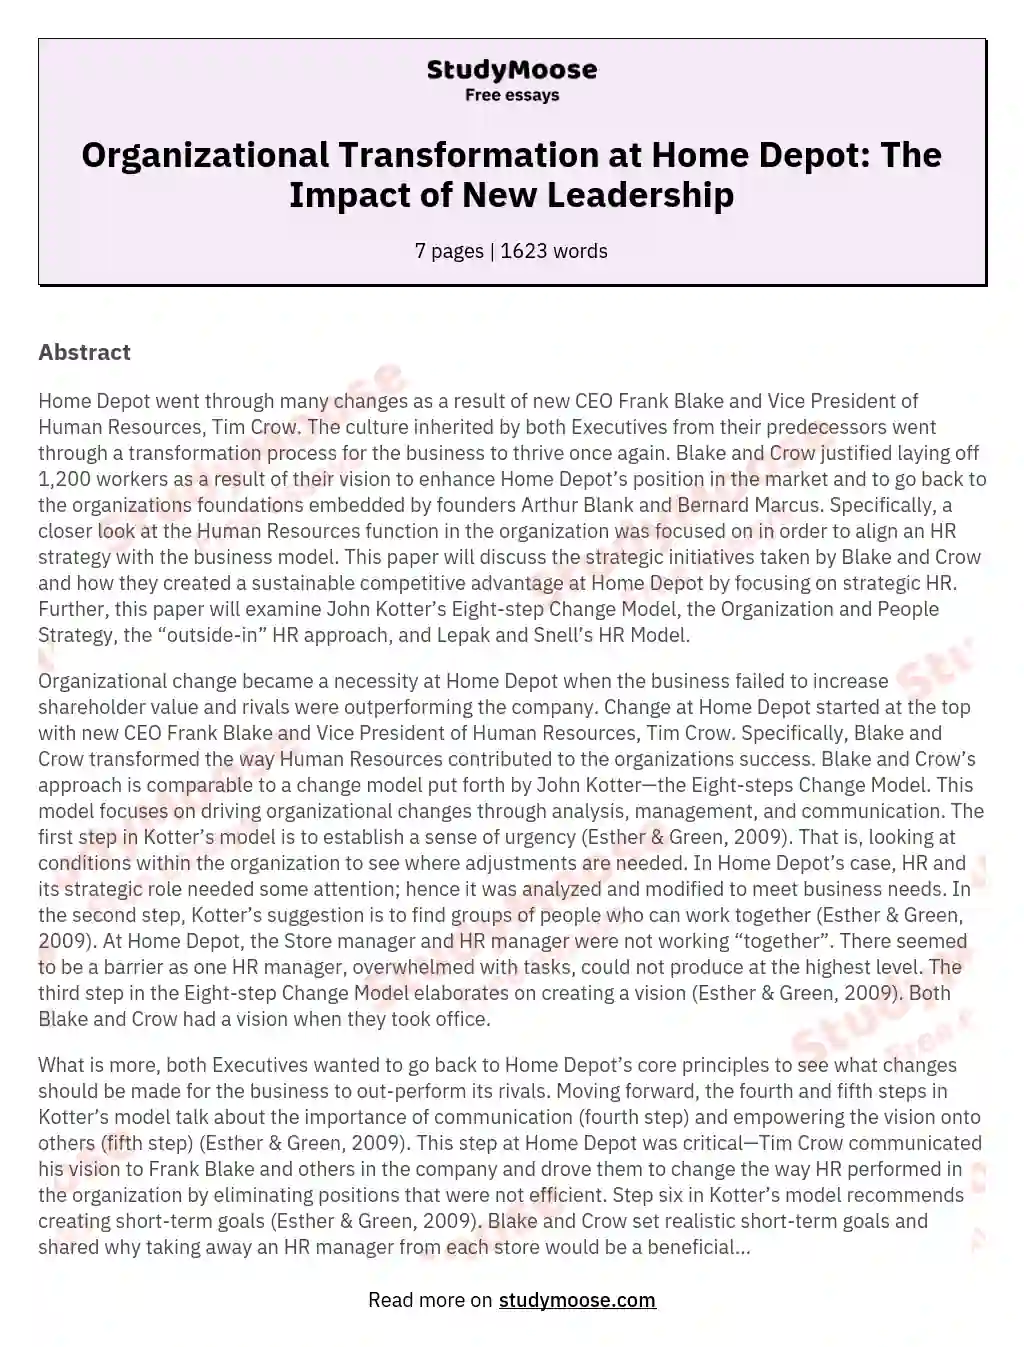 Organizational Transformation at Home Depot: The Impact of New Leadership essay